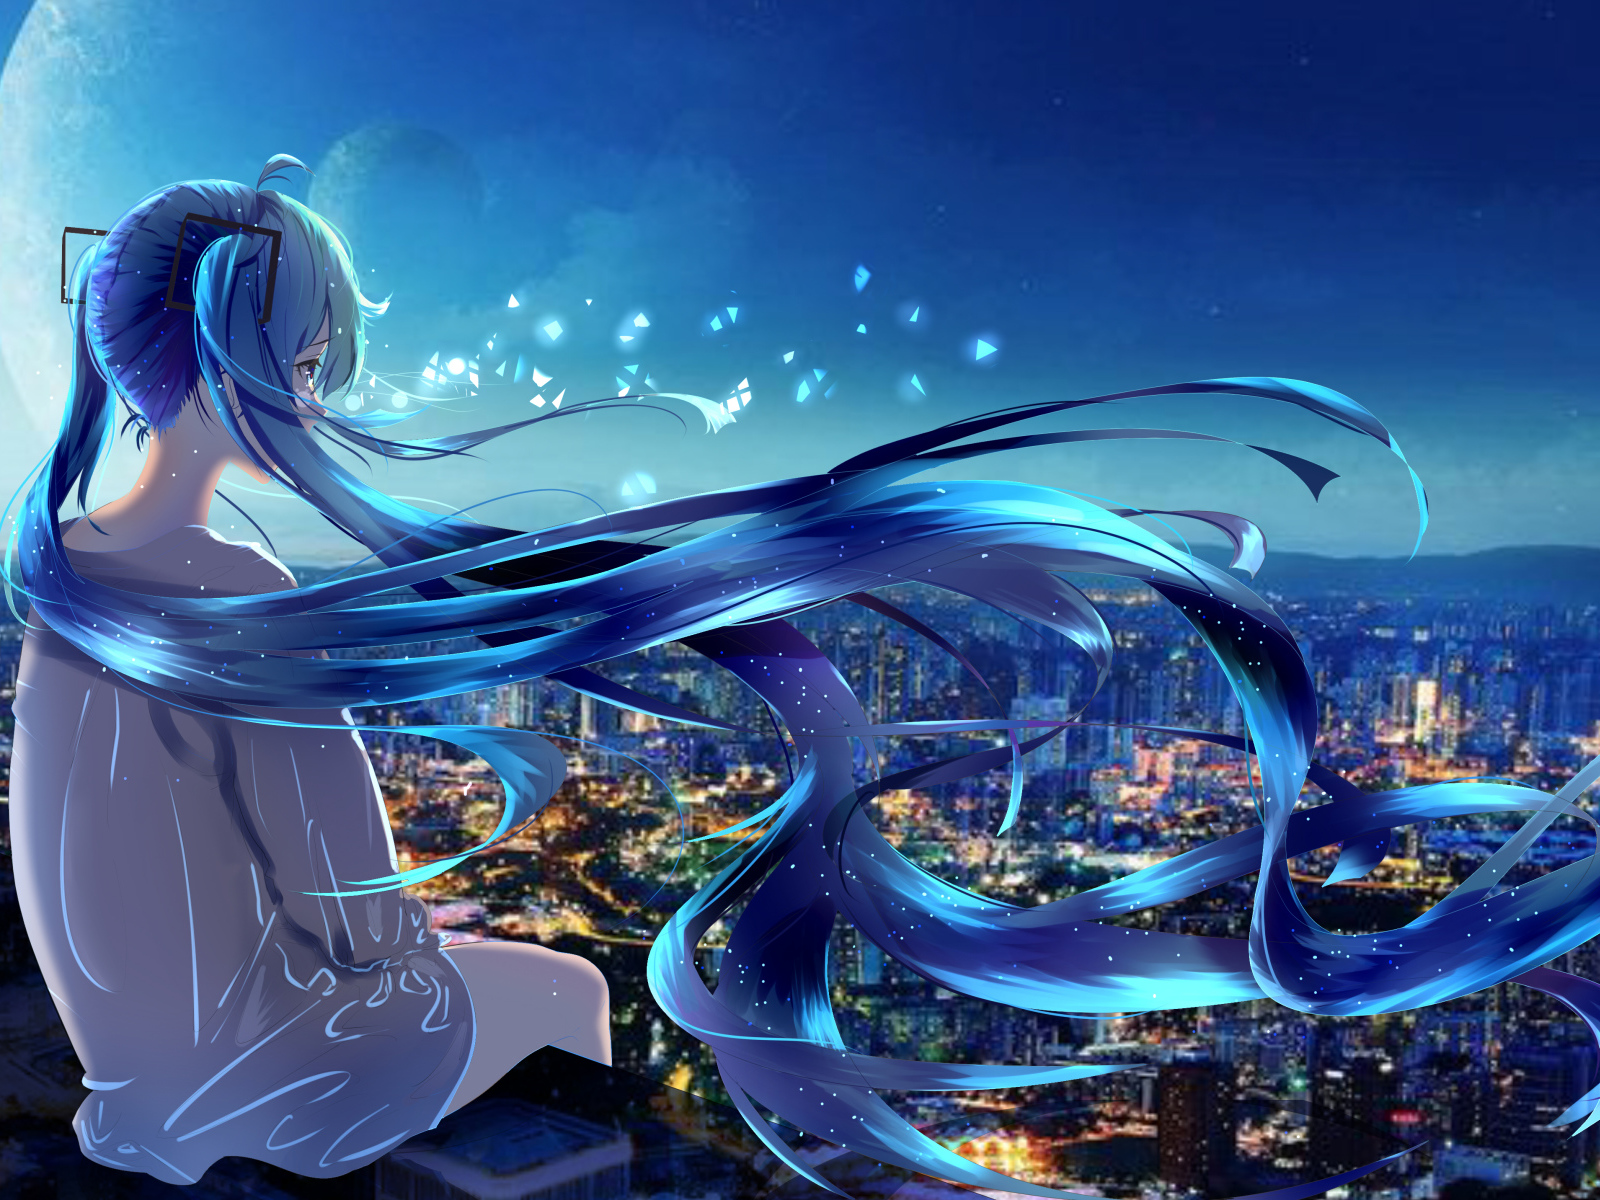 Anime girl with long blue hair sitting on the roof